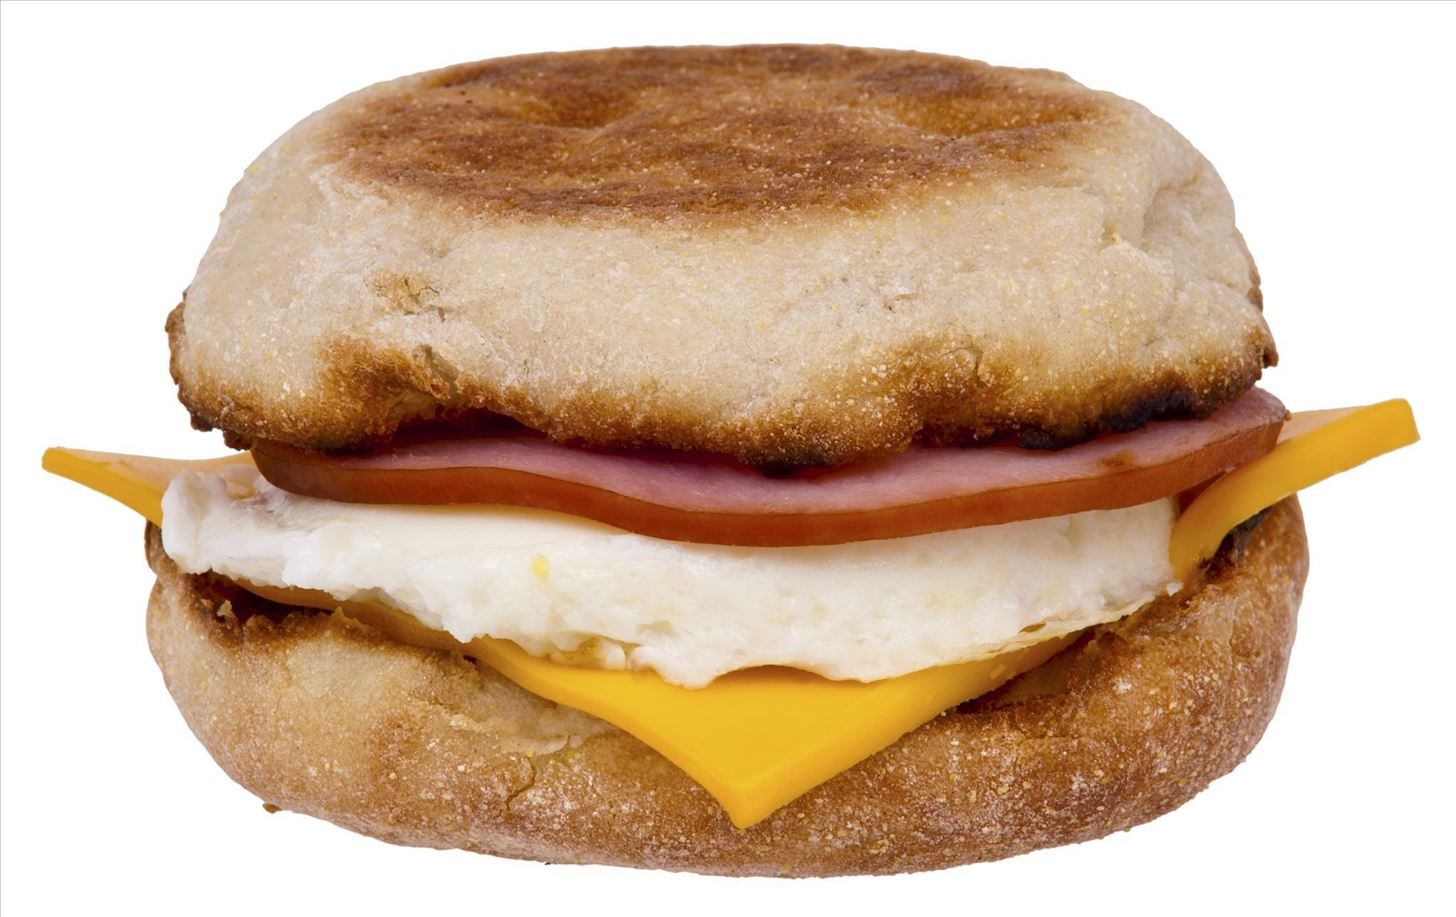 Screw McDonald's—Make Your Own Big Macs, Egg McMuffins, & Other Famous Mickey D's Meals at Home!